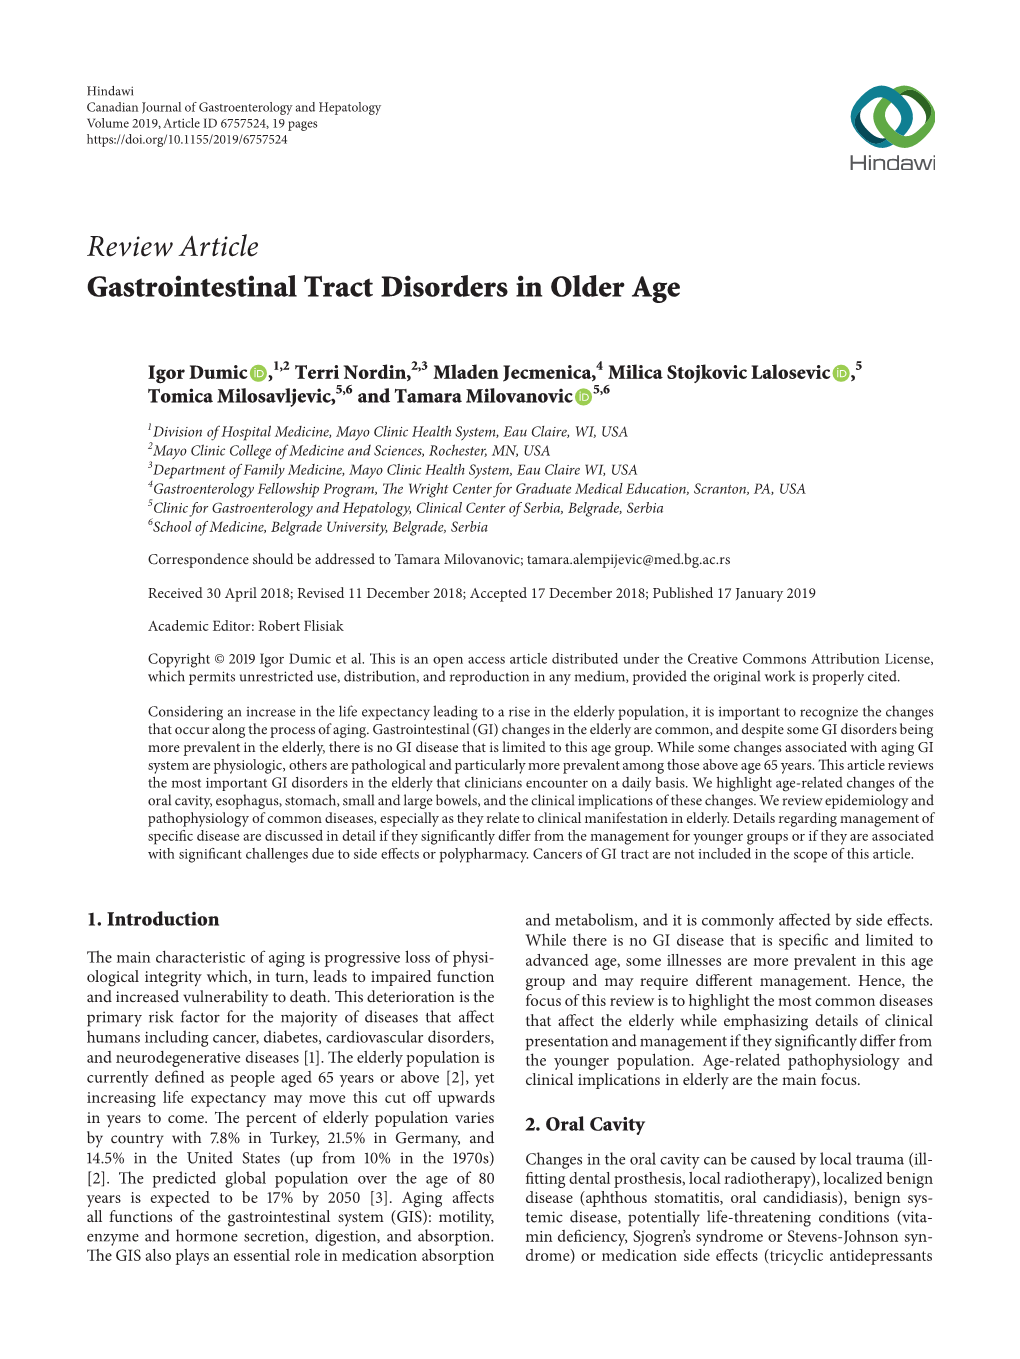 Review Article Gastrointestinal Tract Disorders in Older Age